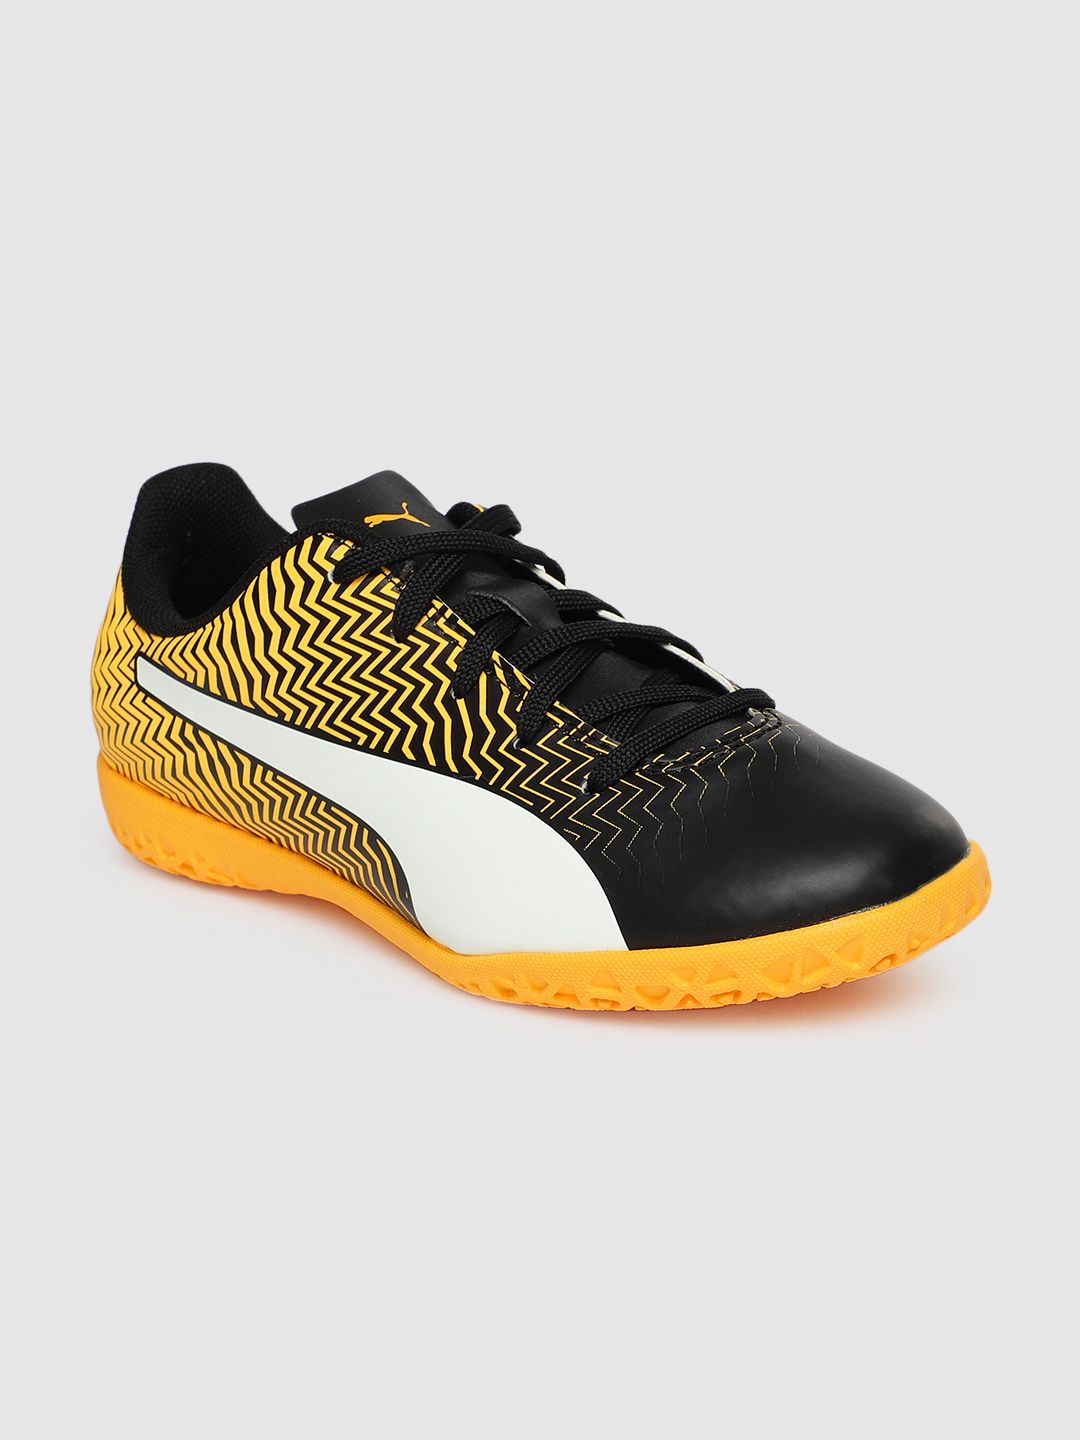 Puma Unisex Yellow Rapido II IT Youth Football Shoes Price in India